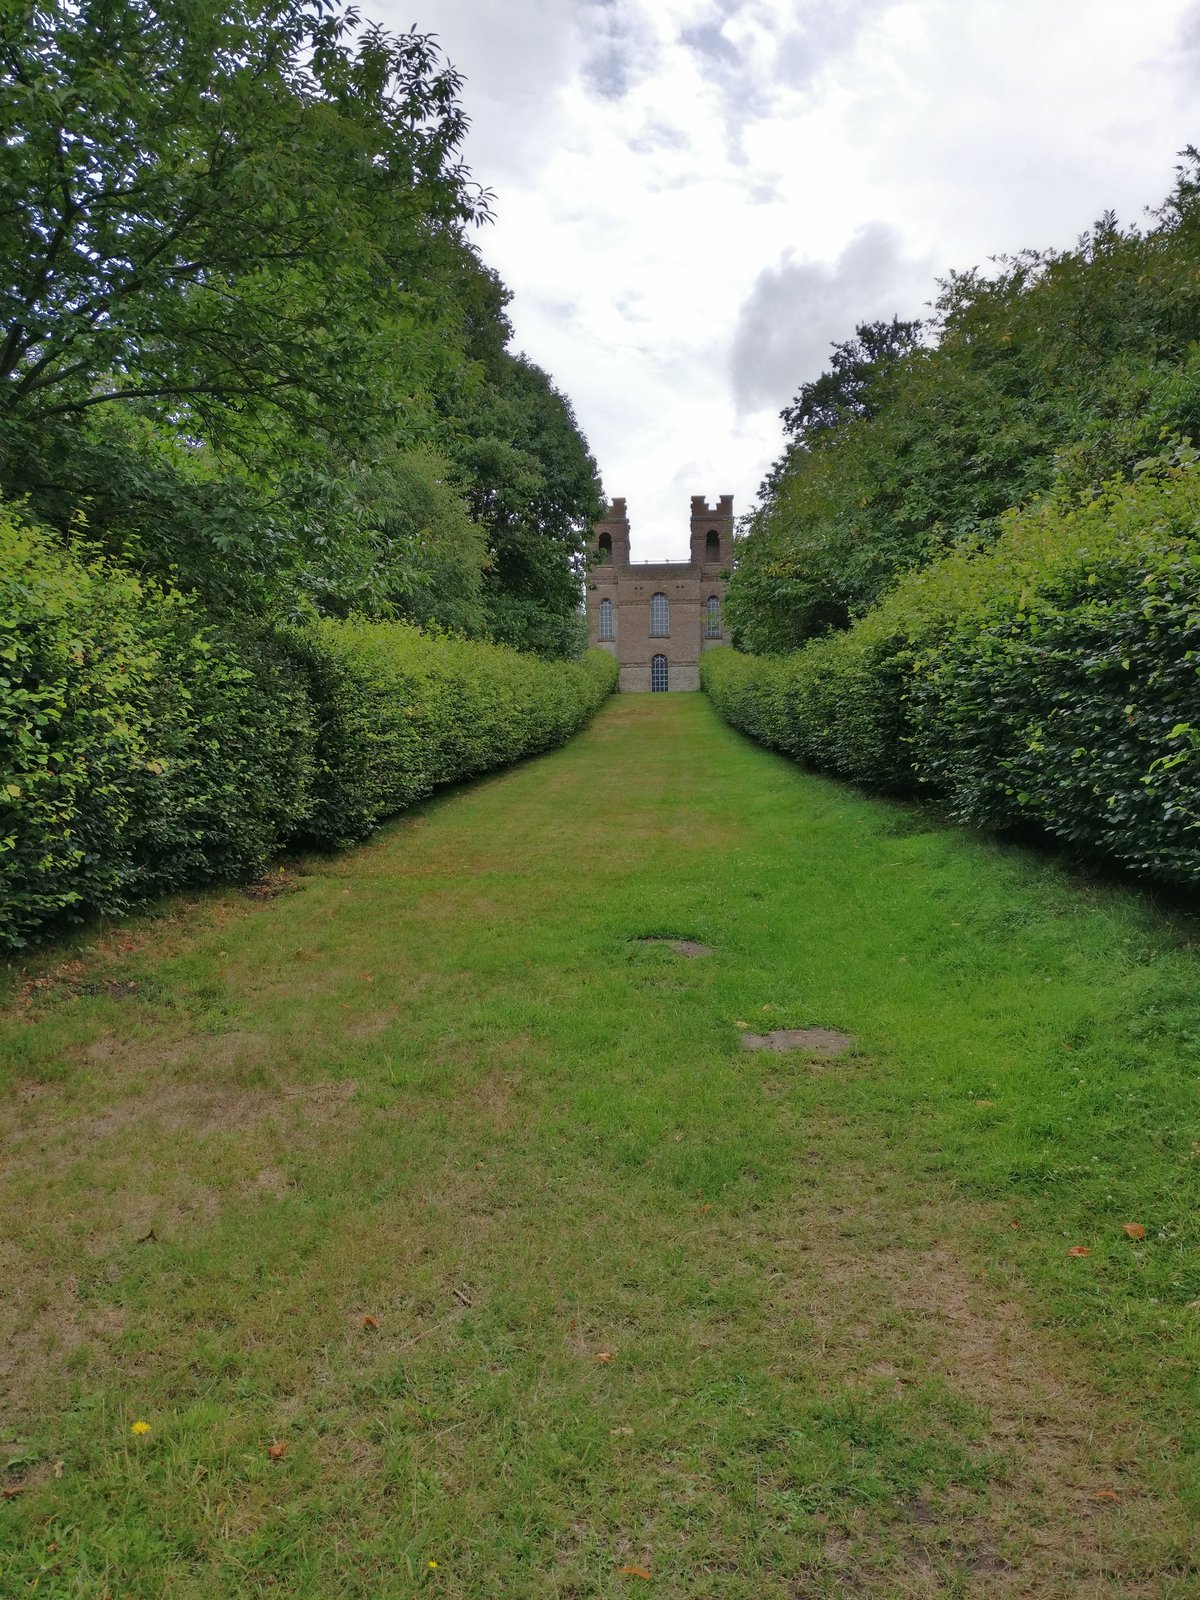 Building after hedge lined path